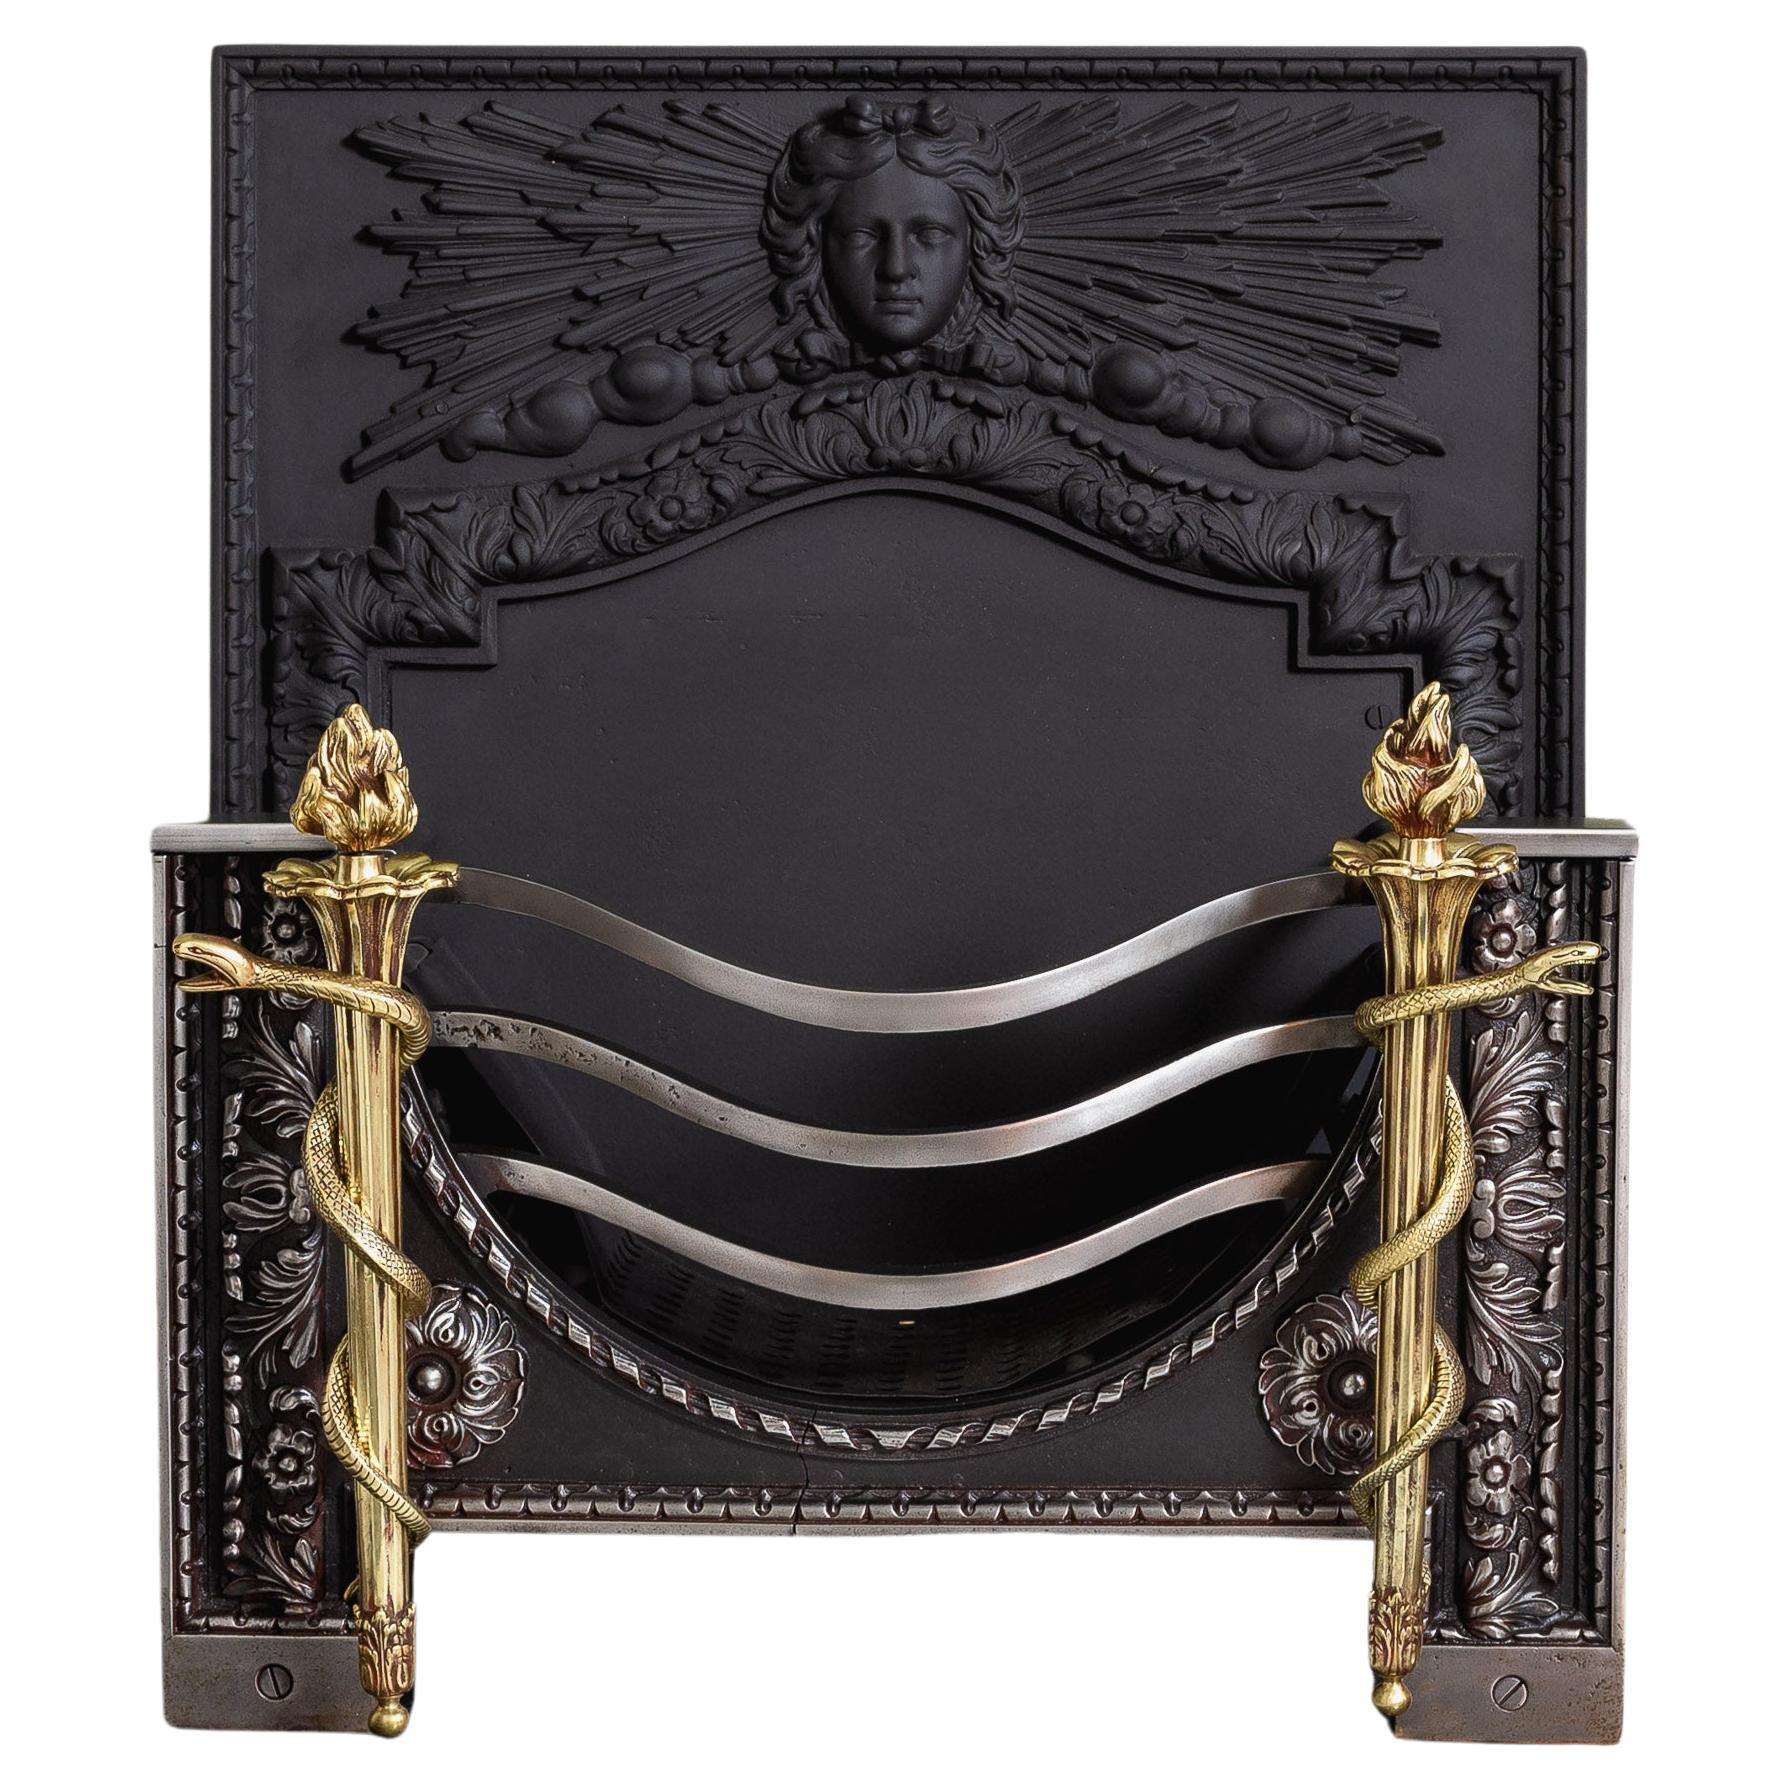 Nineteenth century Baroque Cast Iron and Brass Fire Grate